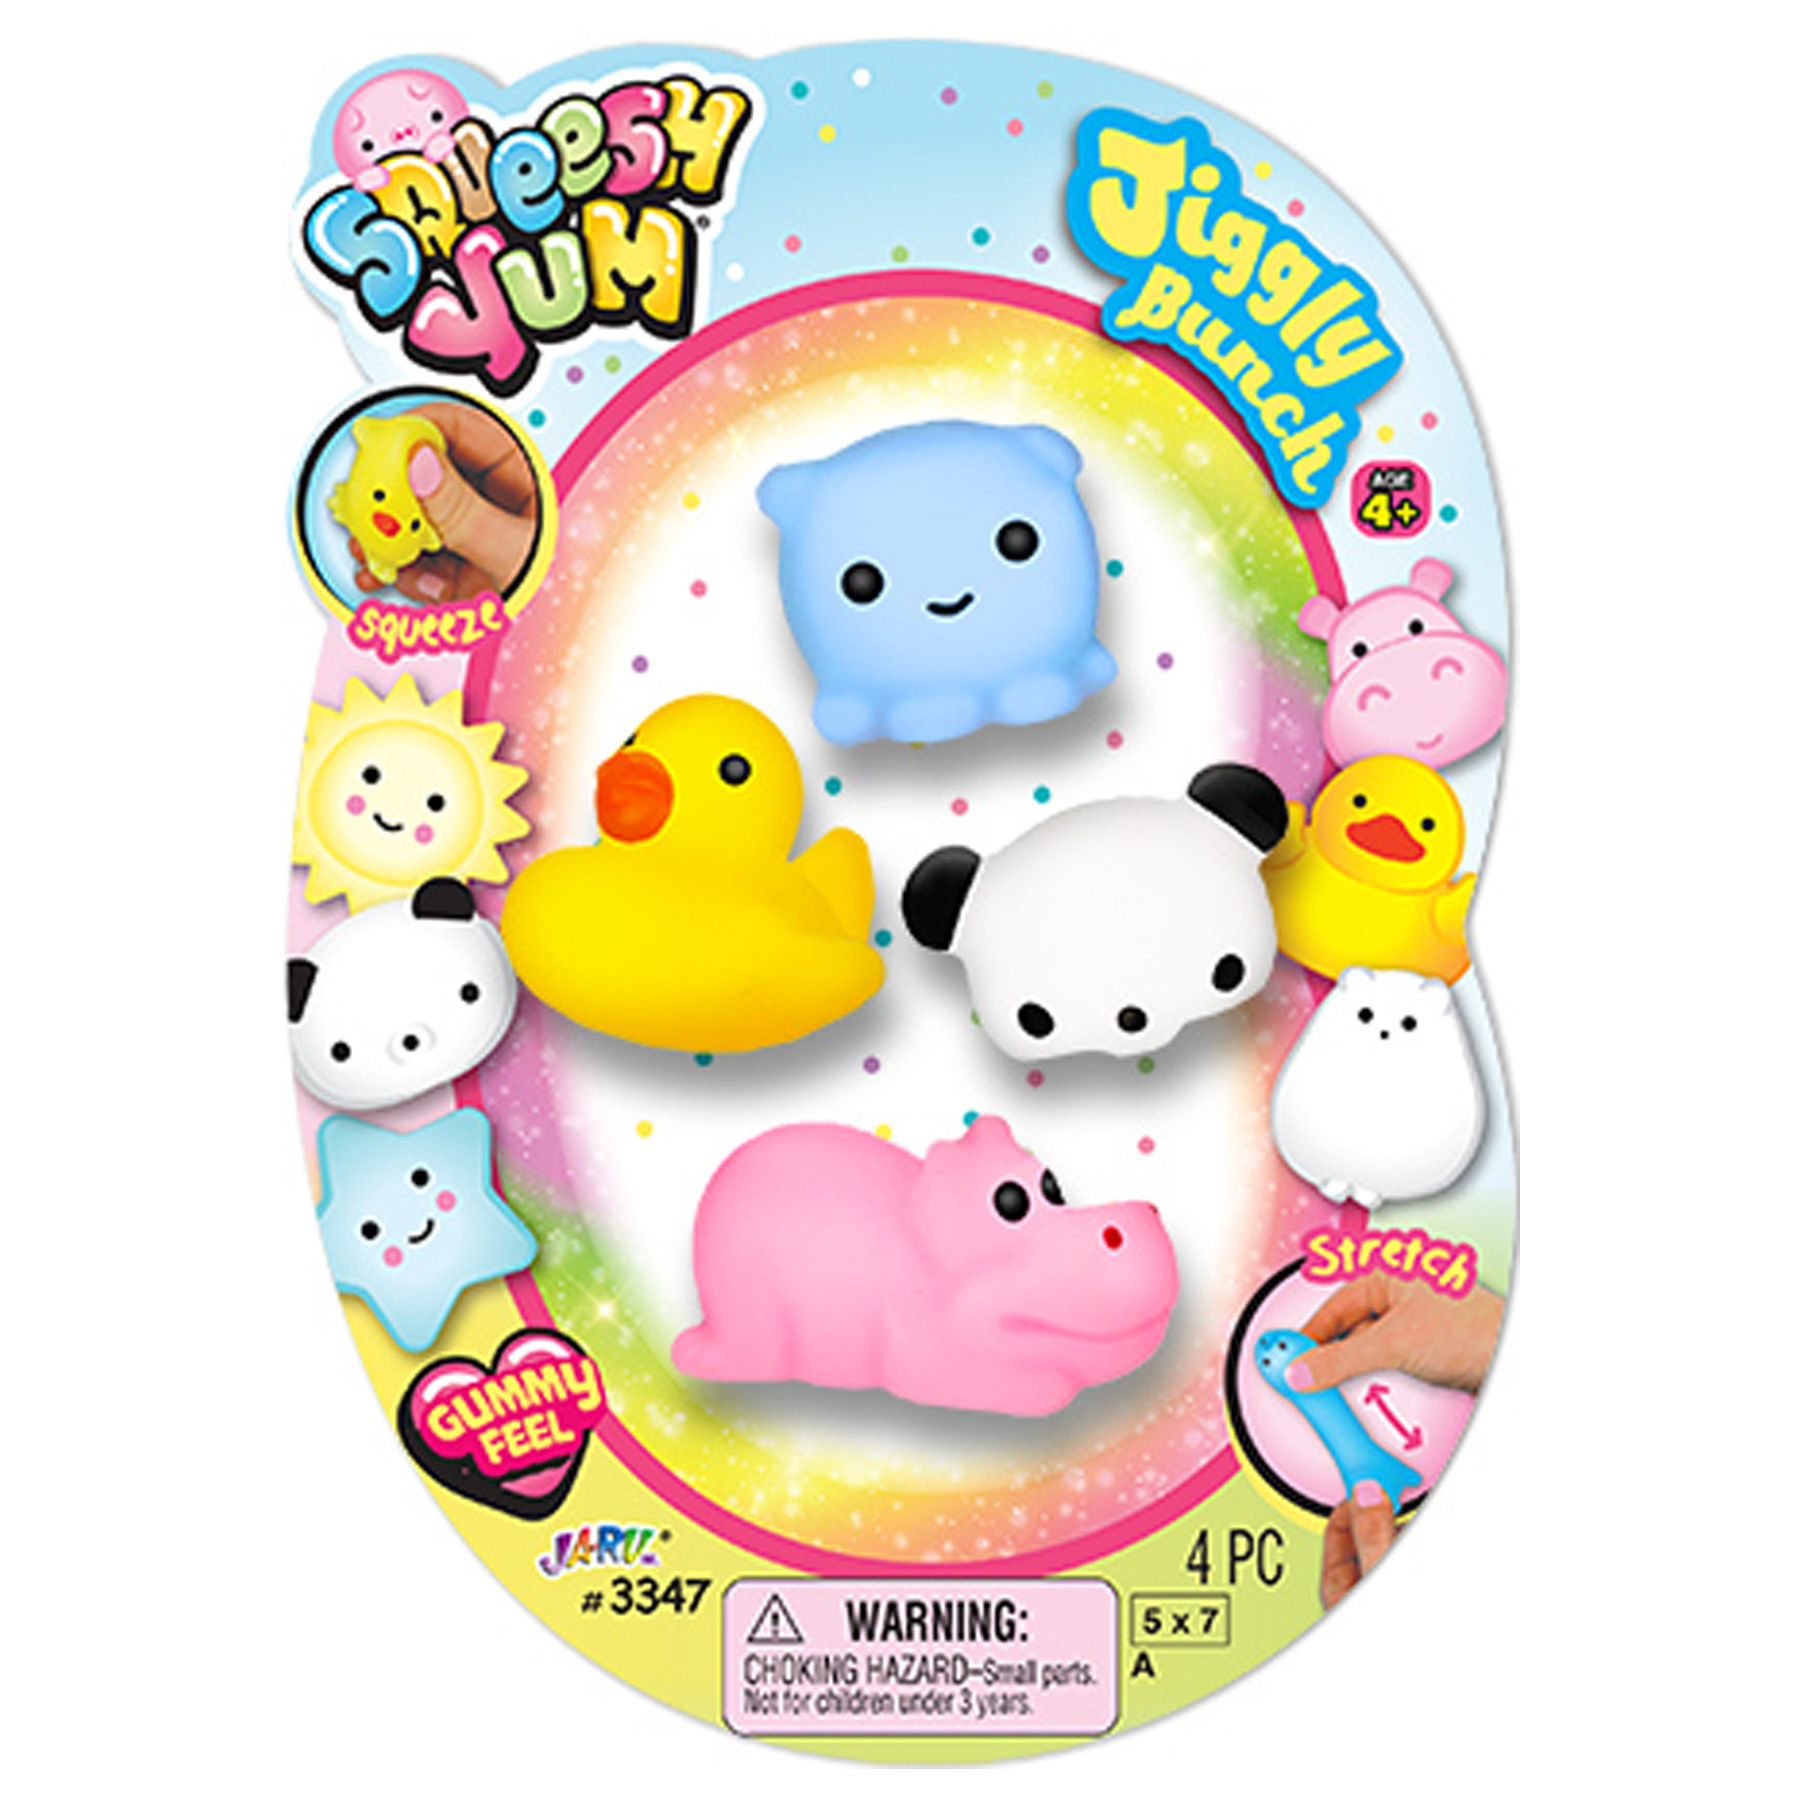 Glow In The Dark Squishy Pals Pack Jiggly Pals NEW Squishy fun AGES 4 AND  UP